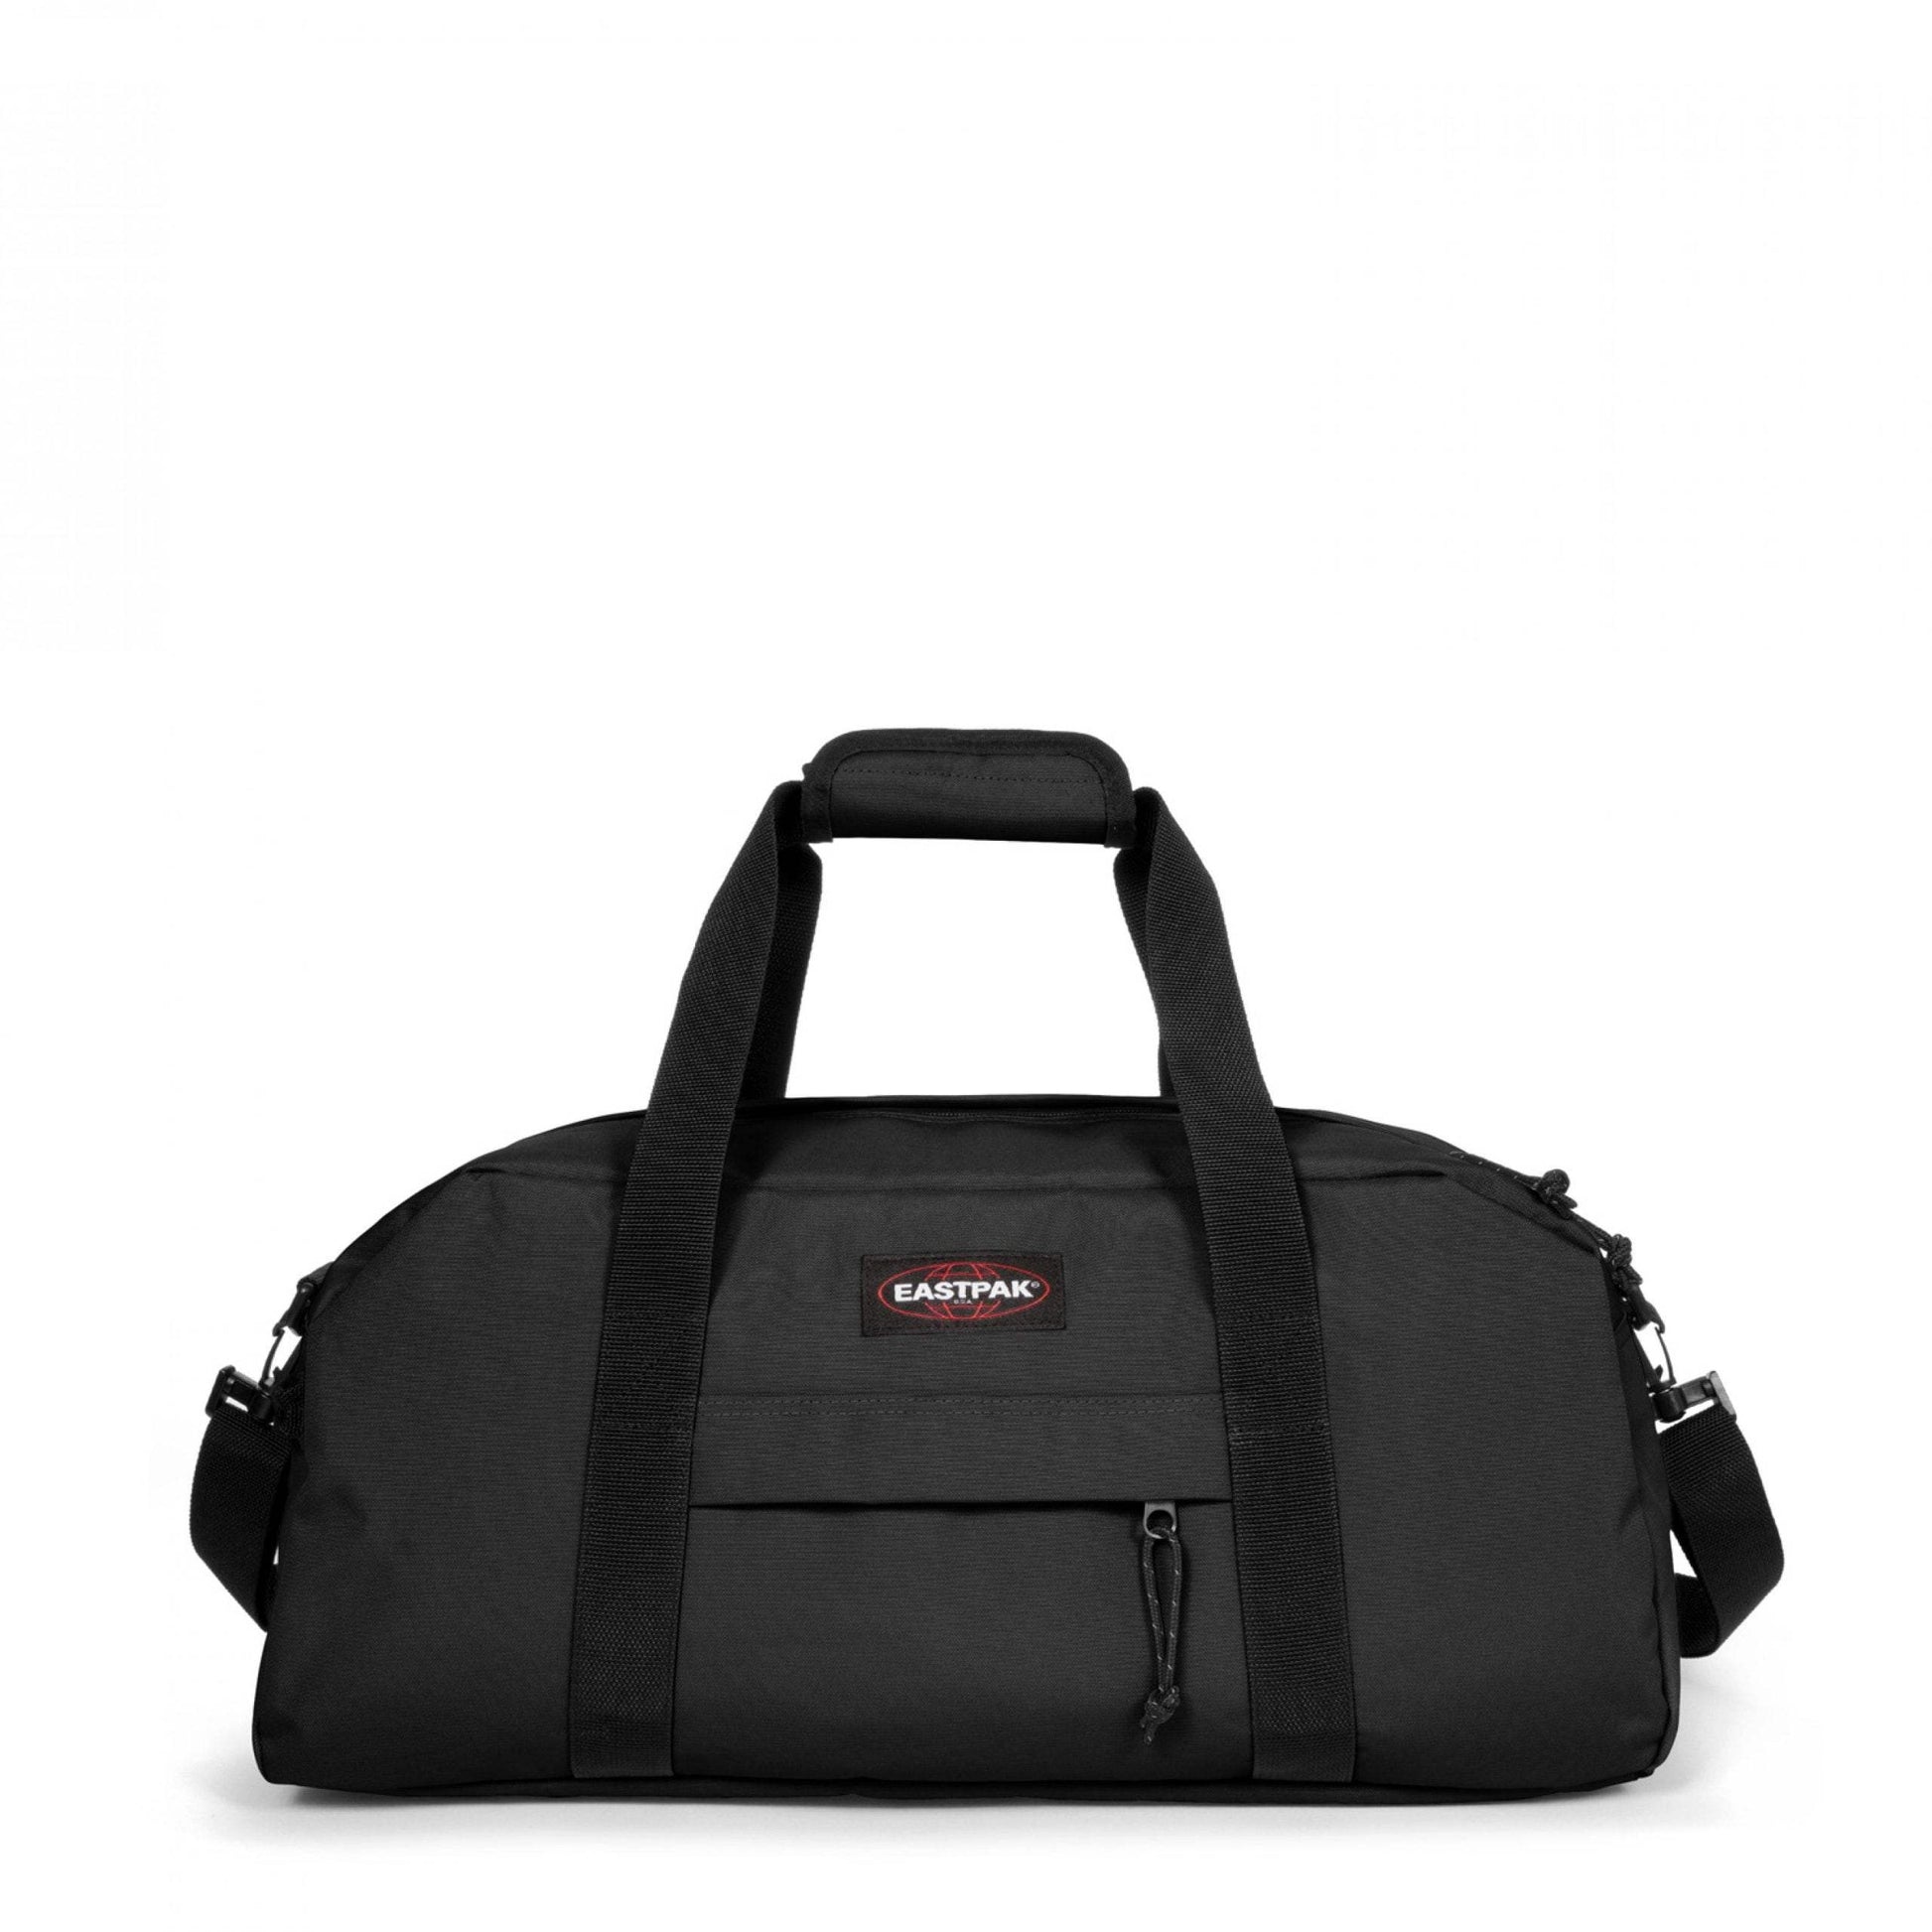 Stand by Eastpak - The Luxury Promotional Gifts Company Limited